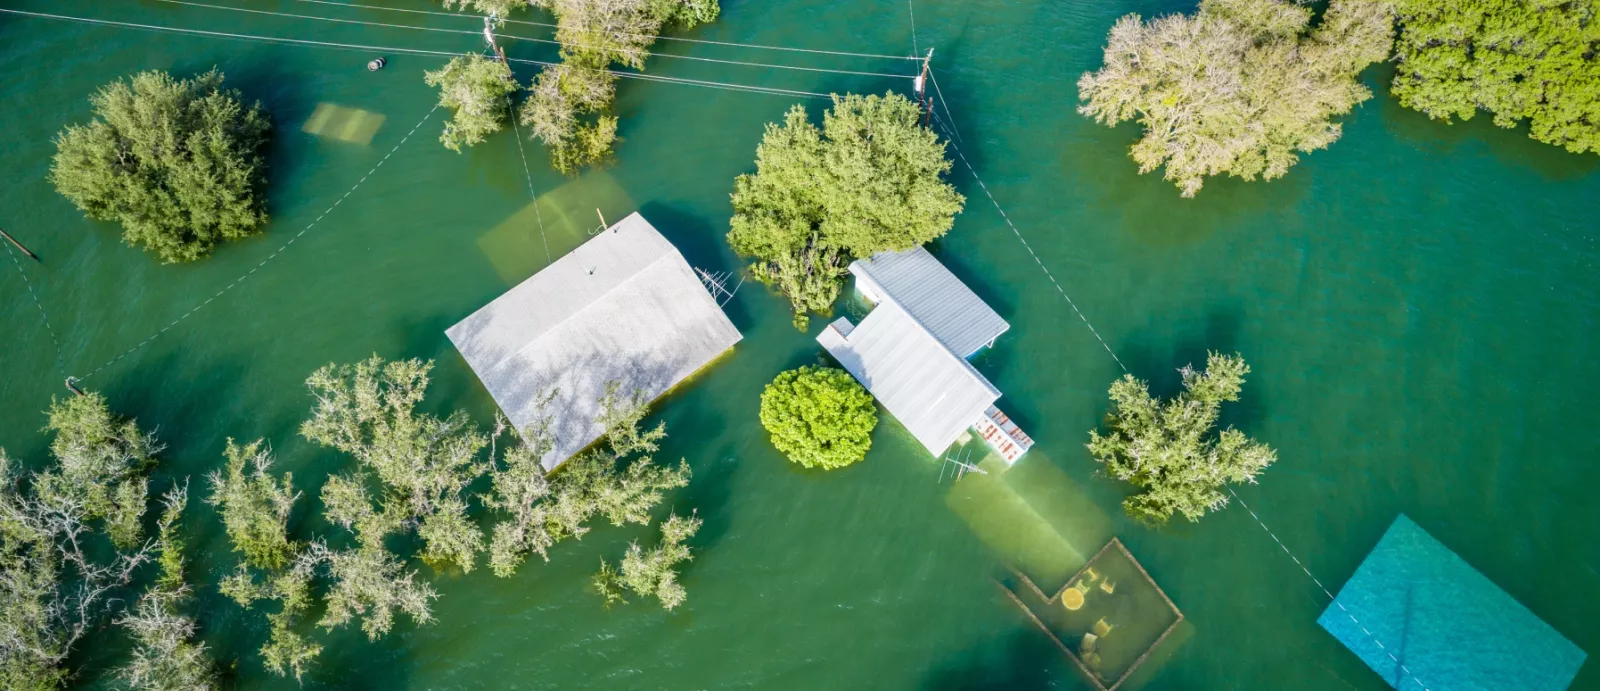 an aerial shot of a neighborhood submerged in green water.